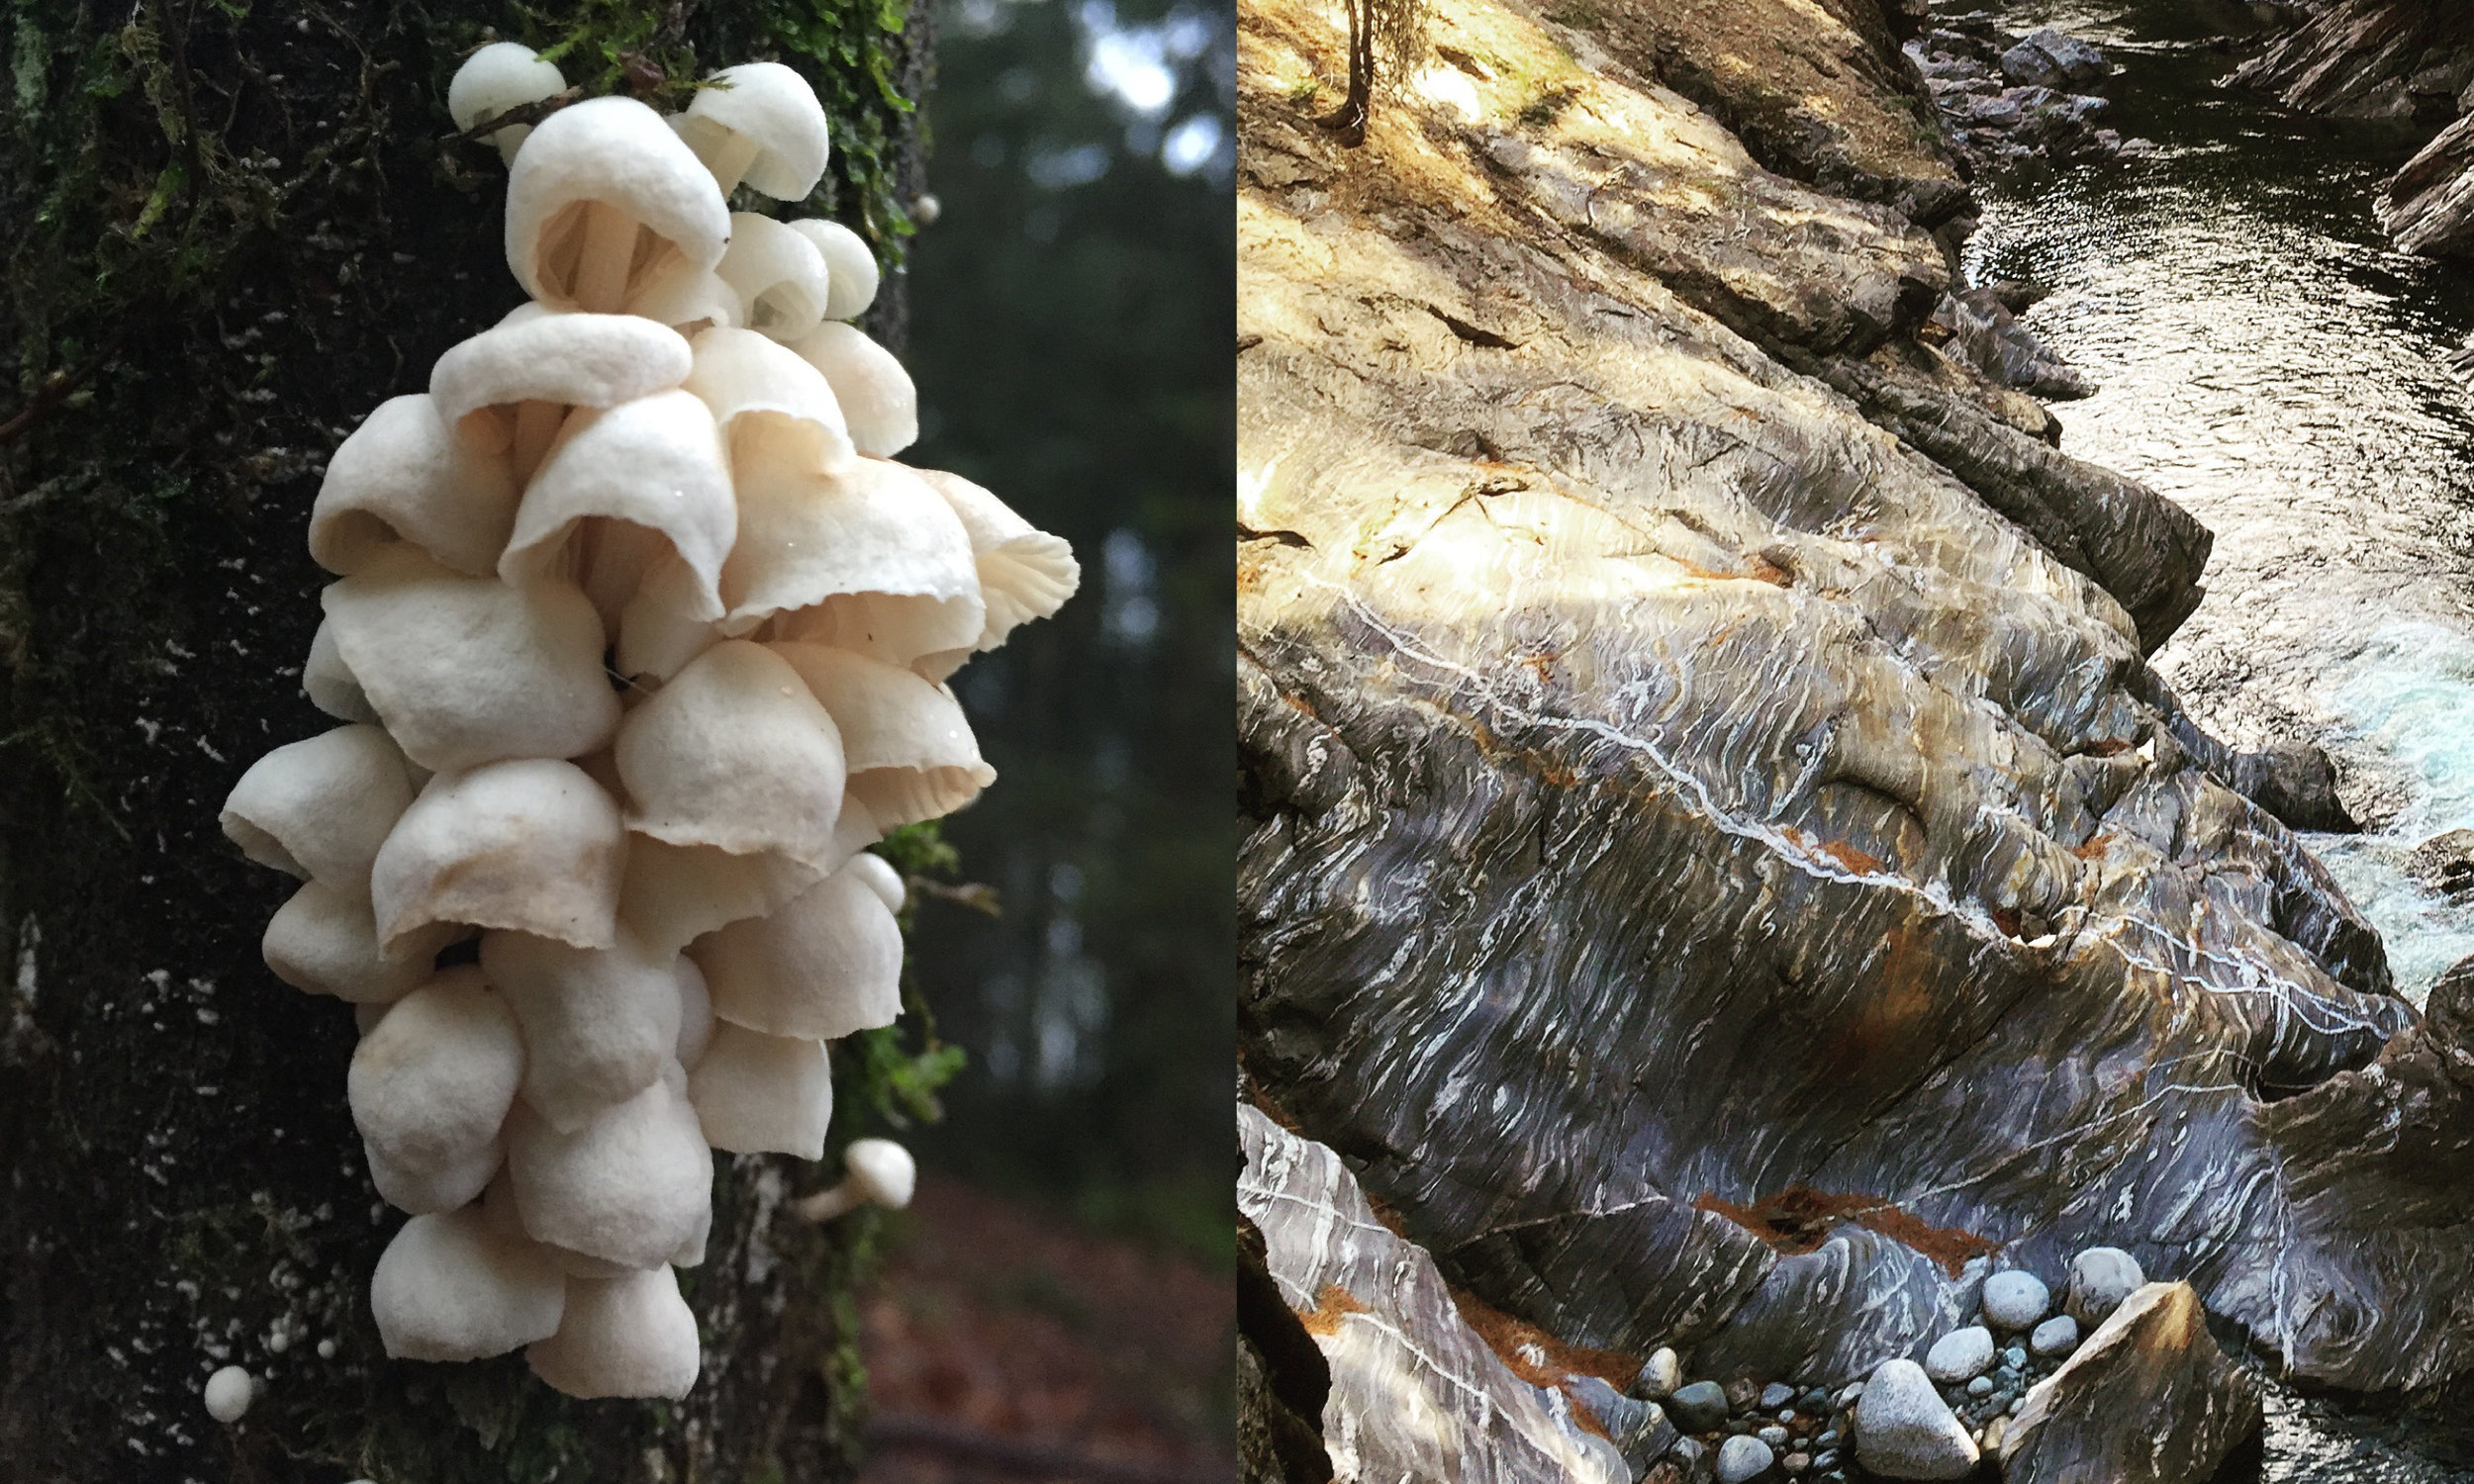 These two photos embody the design I came up with. She's a fanatic for amazing looking mushrooms and posts the most incredible pictures of all the creatures she's come across on her hikes. The water worn rock blew their minds when they came across it on a hike near Leavenworth.